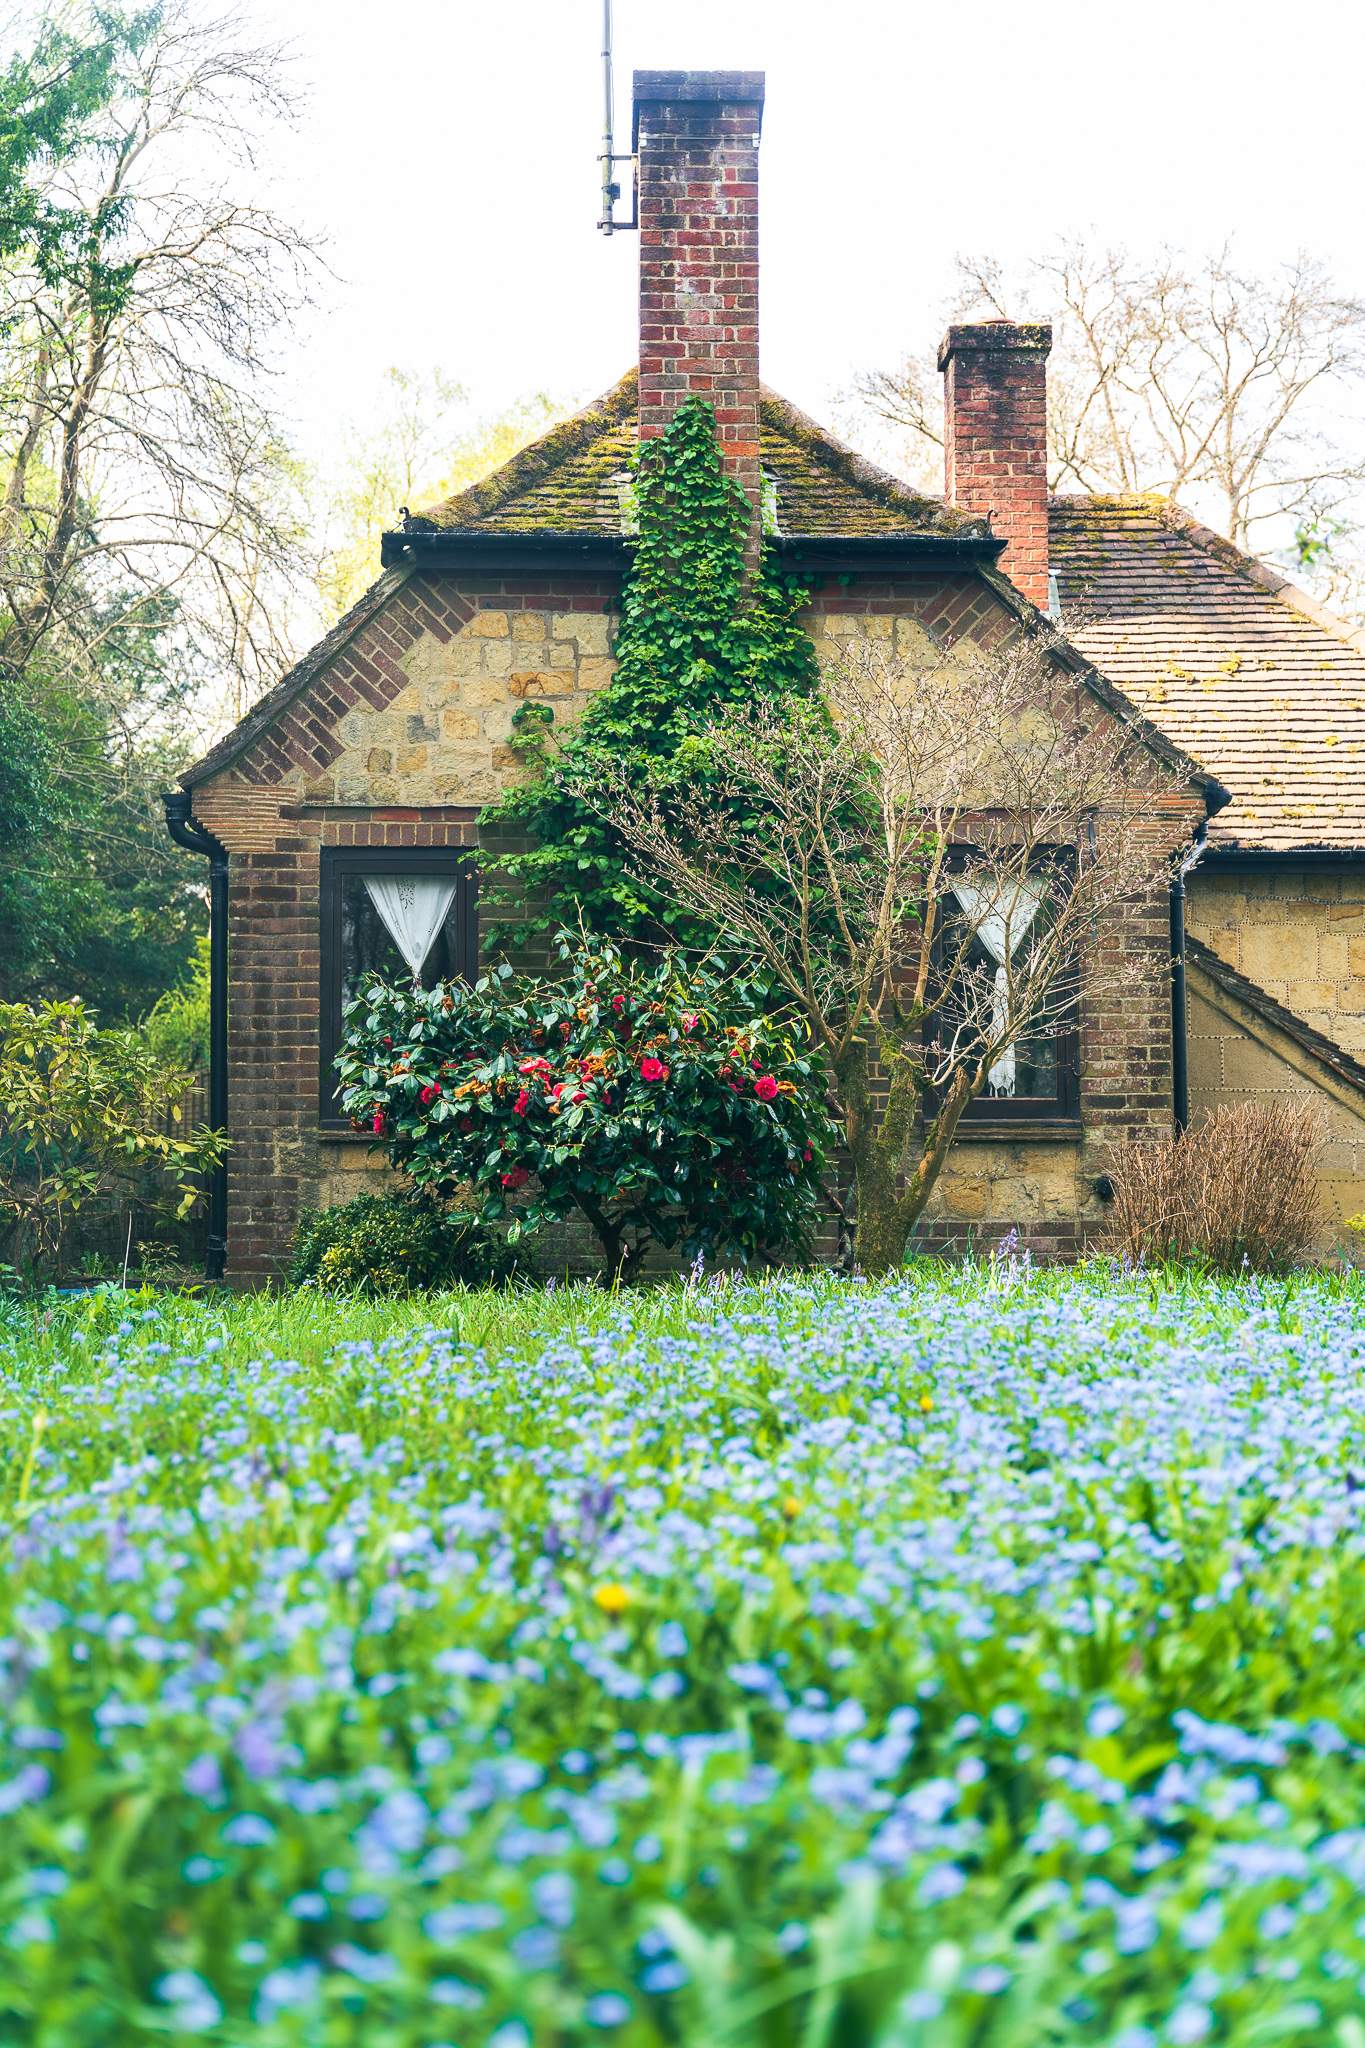 A very picturesque-looking house with beautiful patch of Forget-Me-Not flowers in front